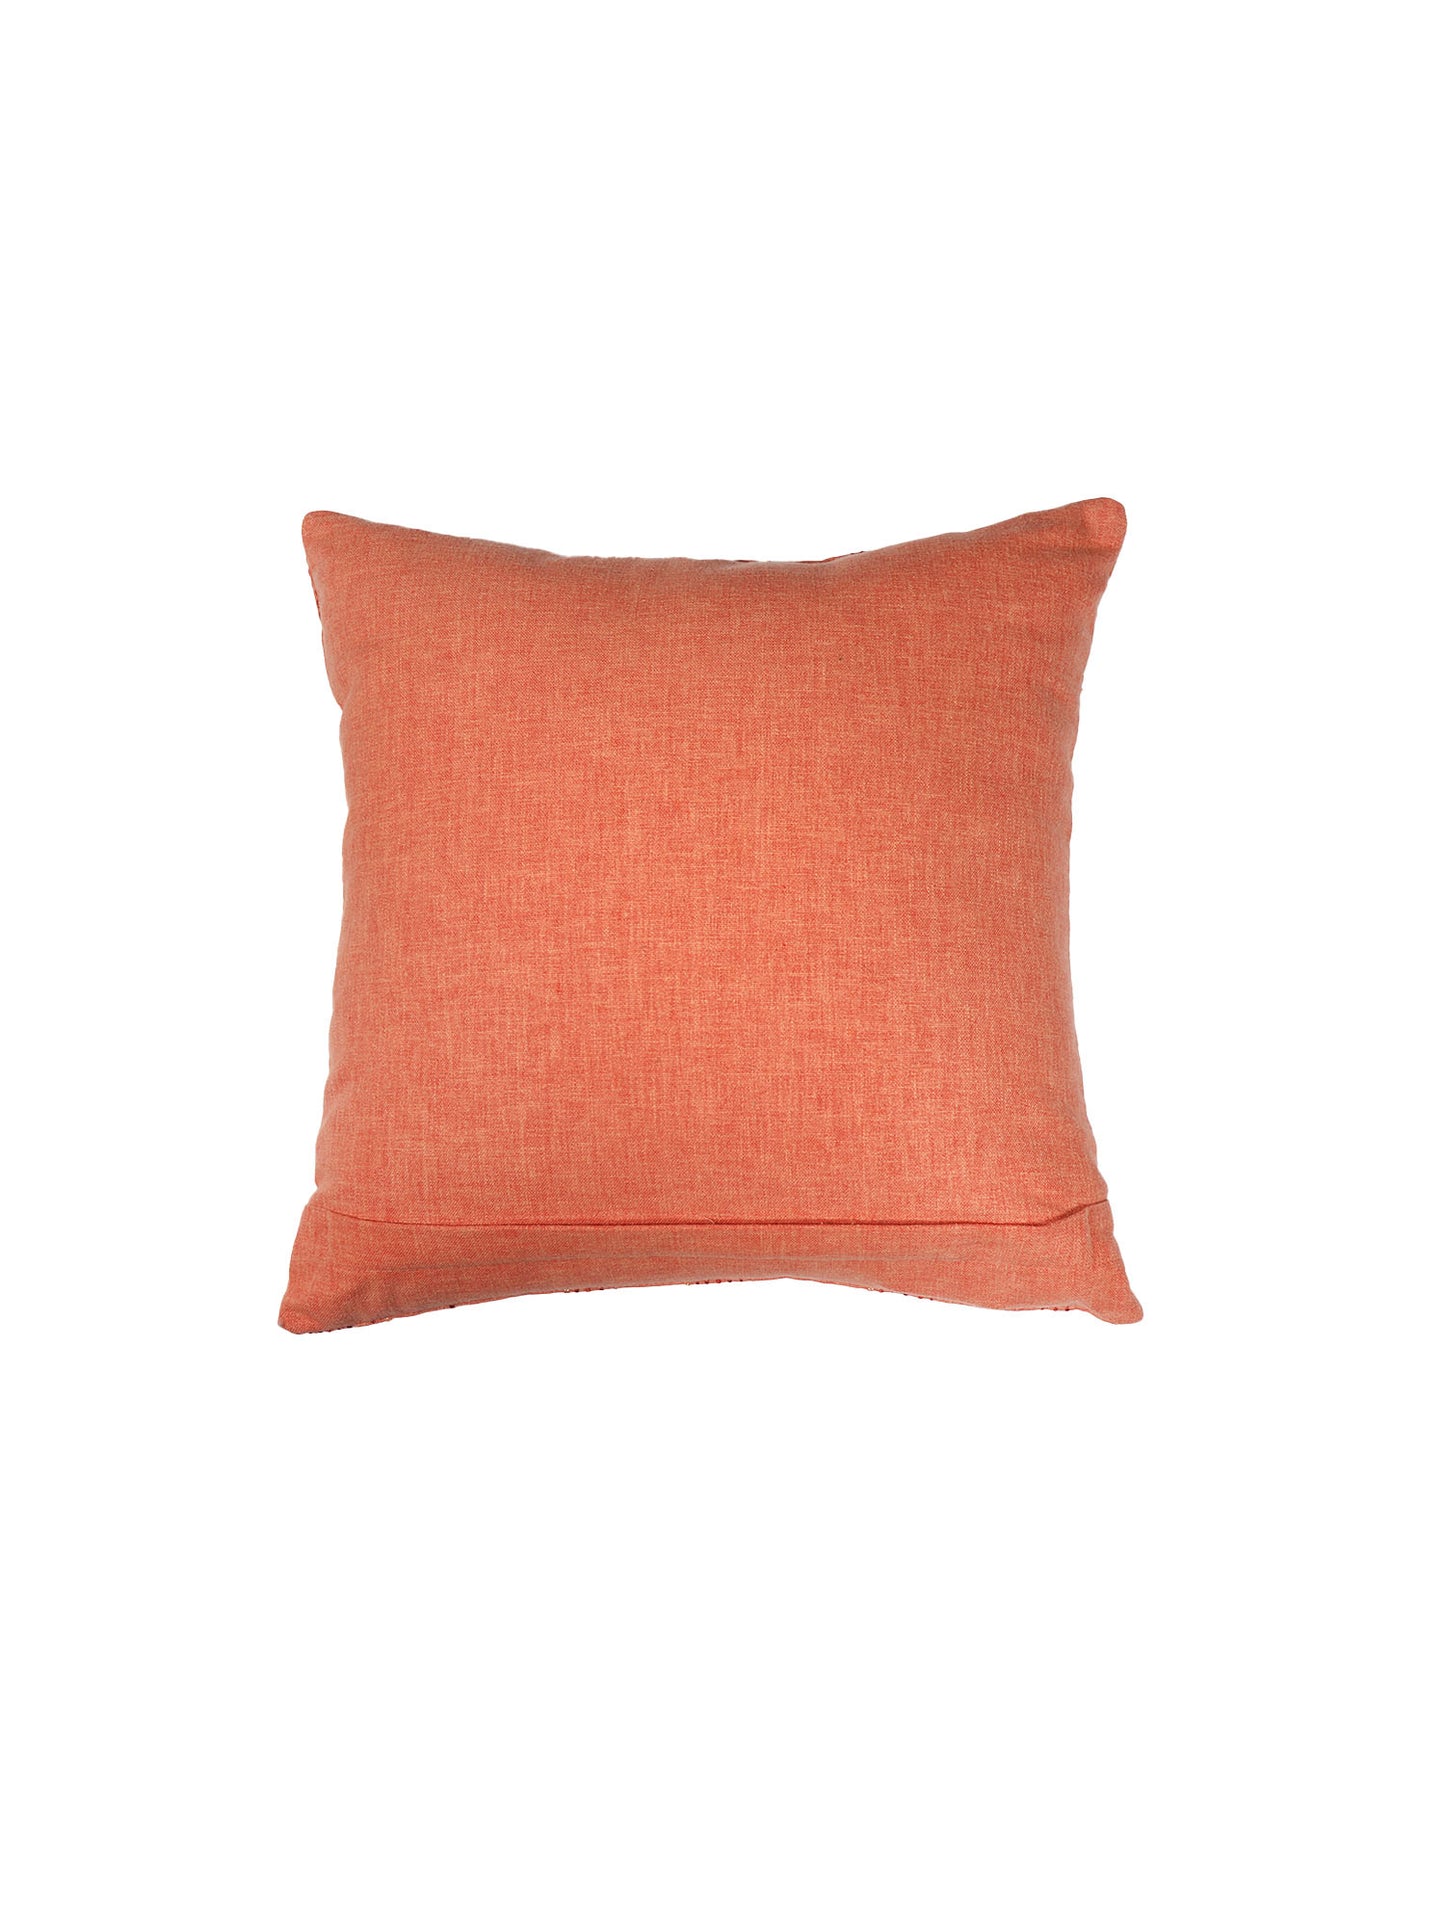 Hand Embrodiered Cushion Cover - Luxe Collection | Sofa, Bedroom, Couch | Polycanvas Abstract Lines - Orange - 16x16 inch (40x40 cms) (Pack of 1)